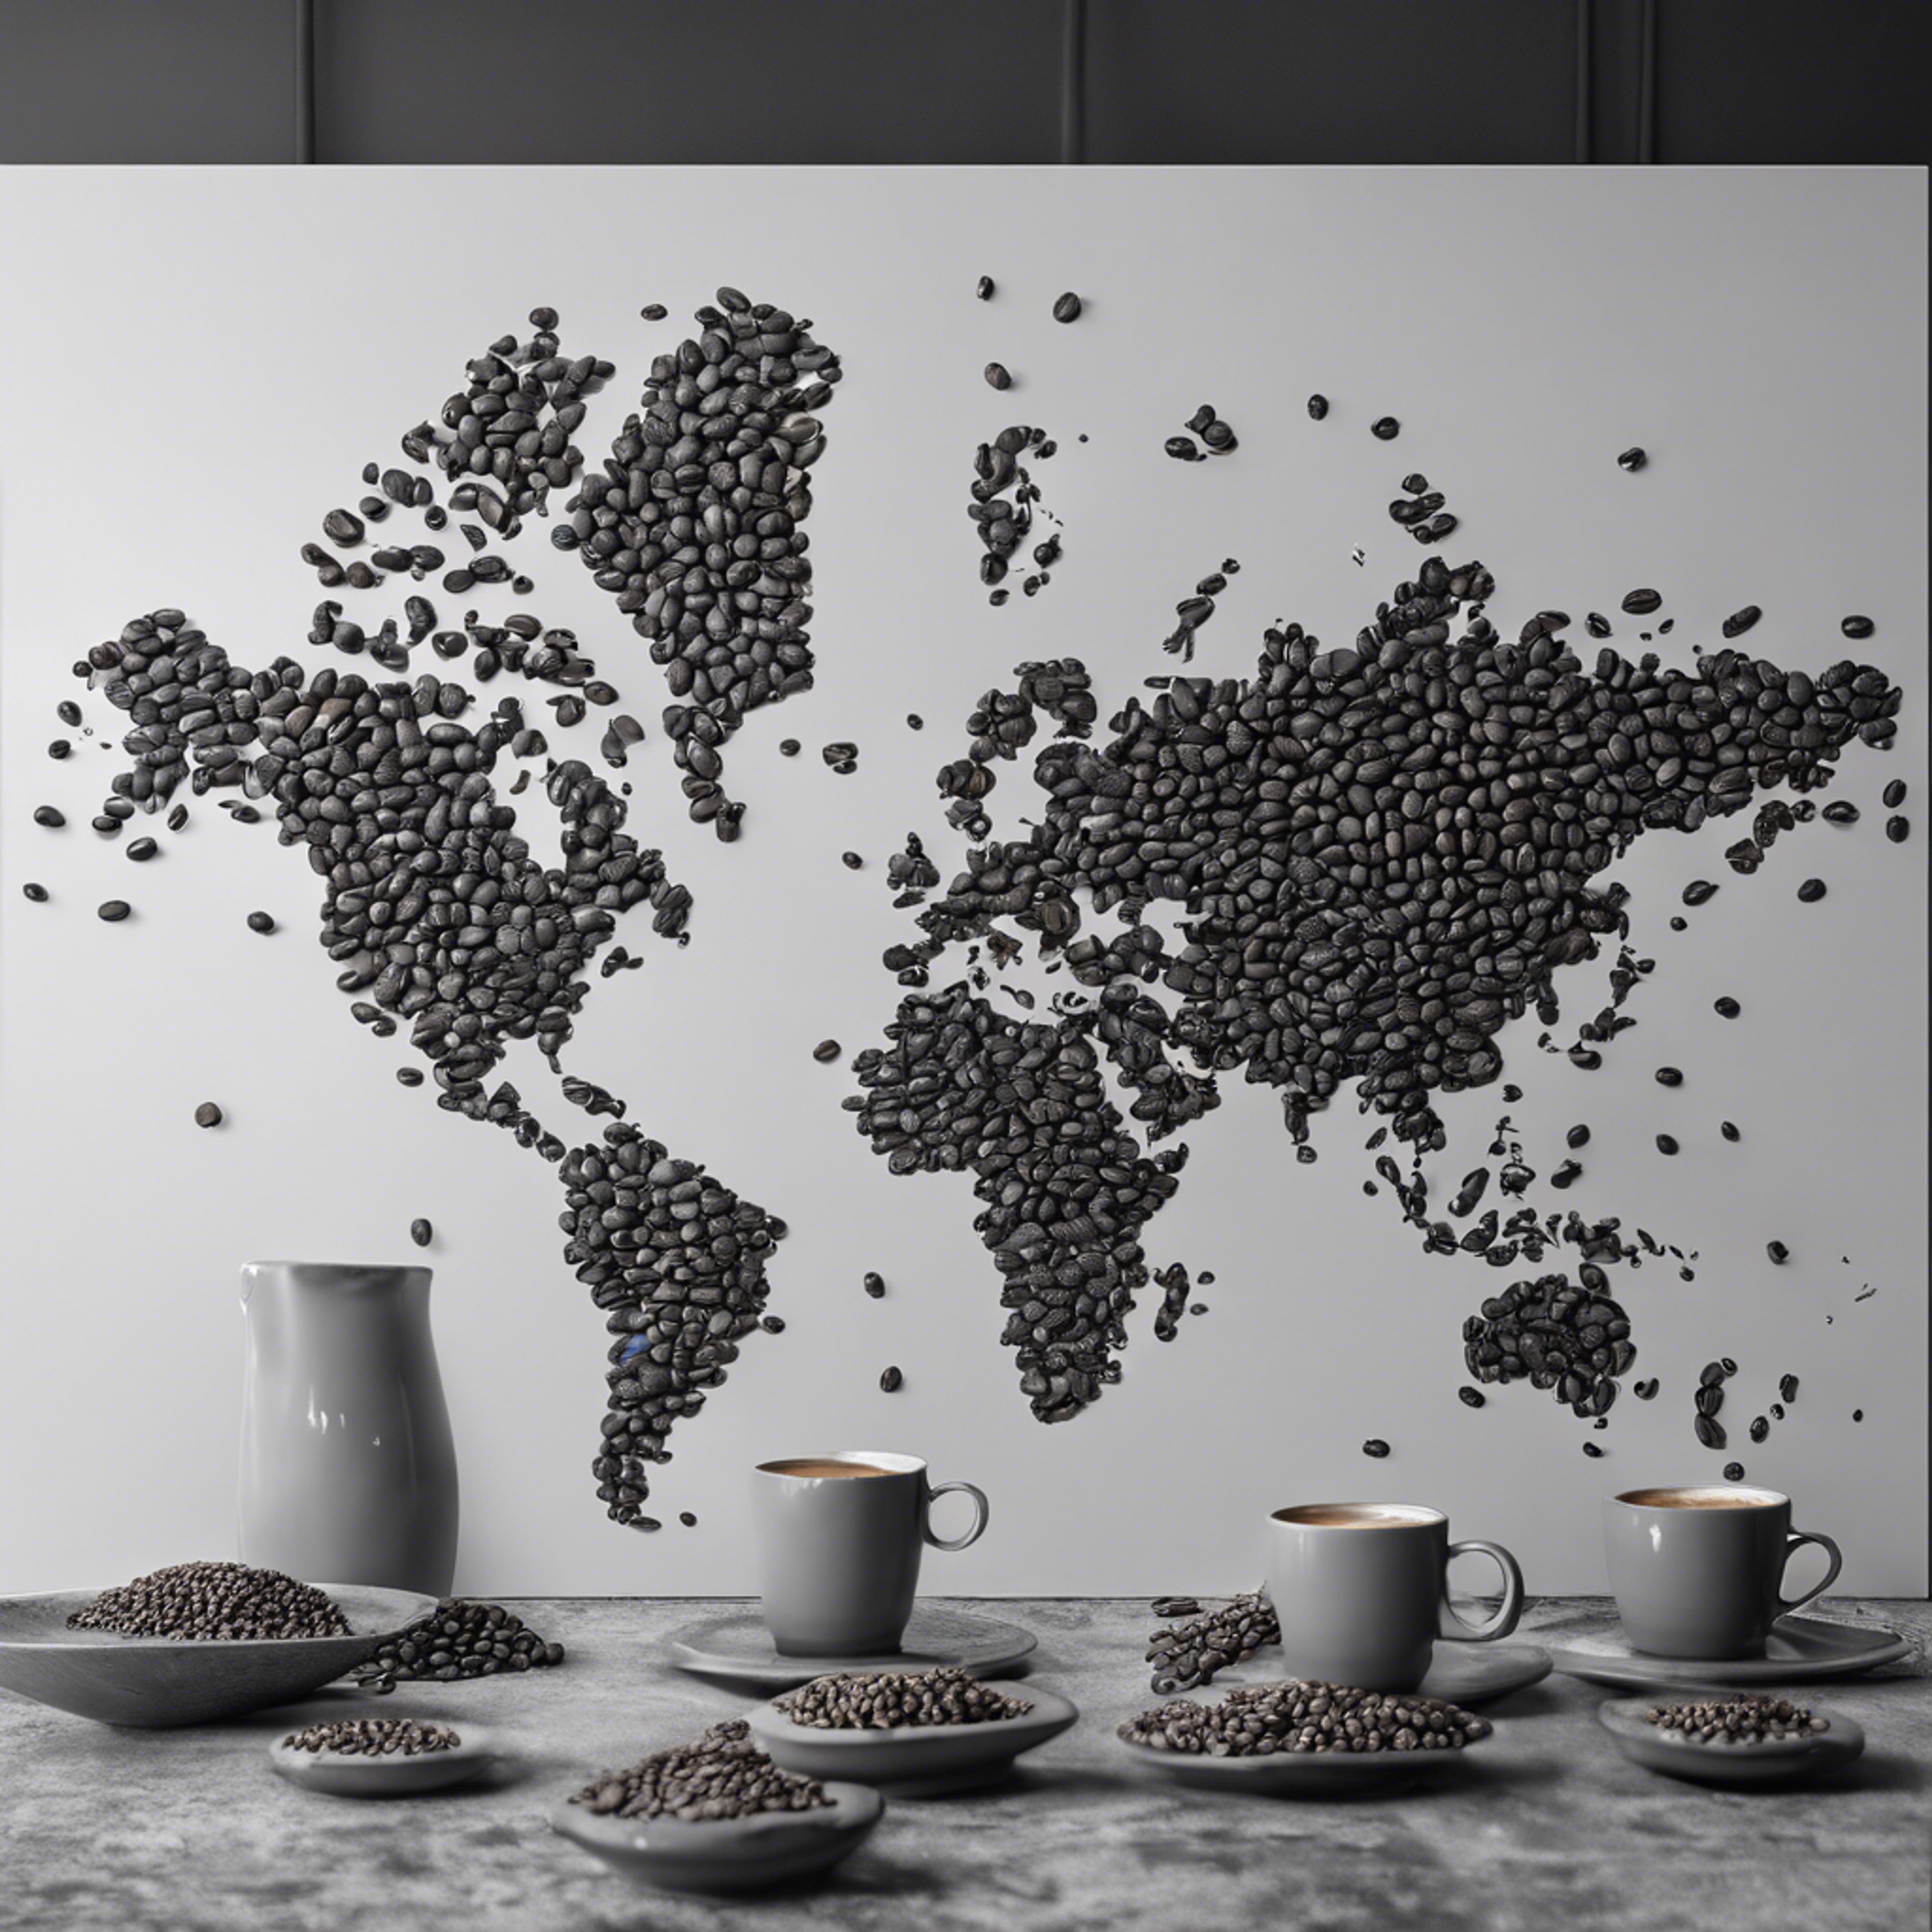 A grayscale world map laid out with coffee beans on a cafe table. Tapet[a42175c9d73a43528667]